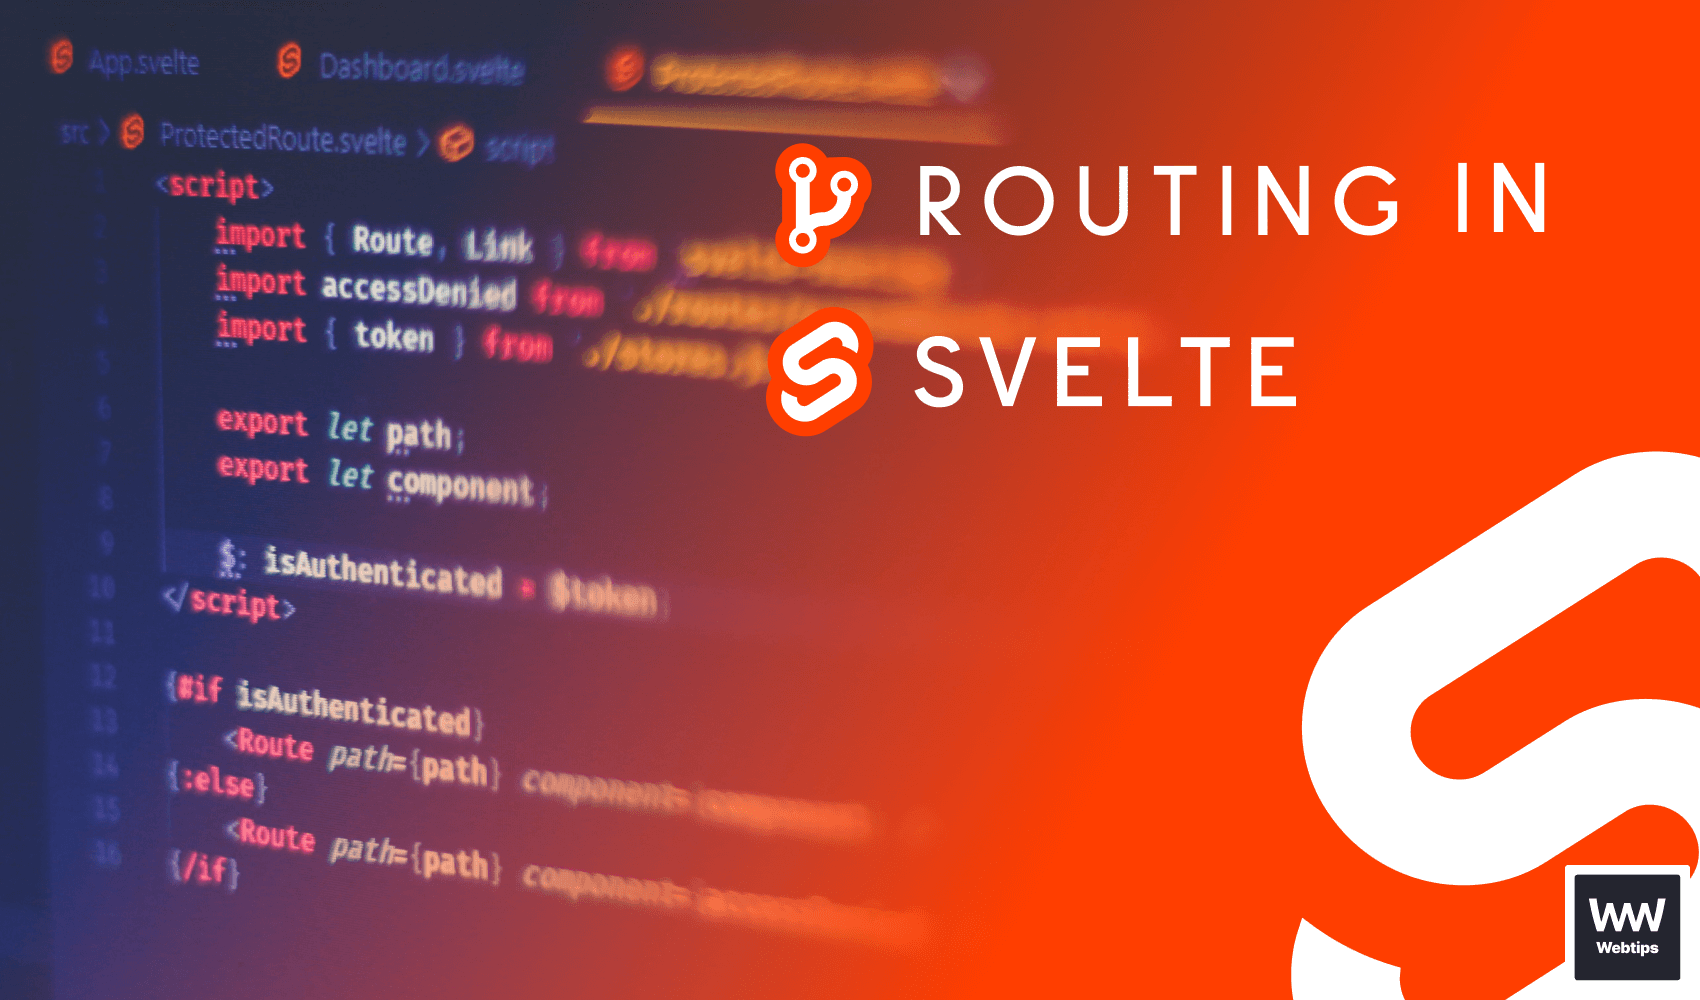 The Easy Way to Do Routing in Svelte